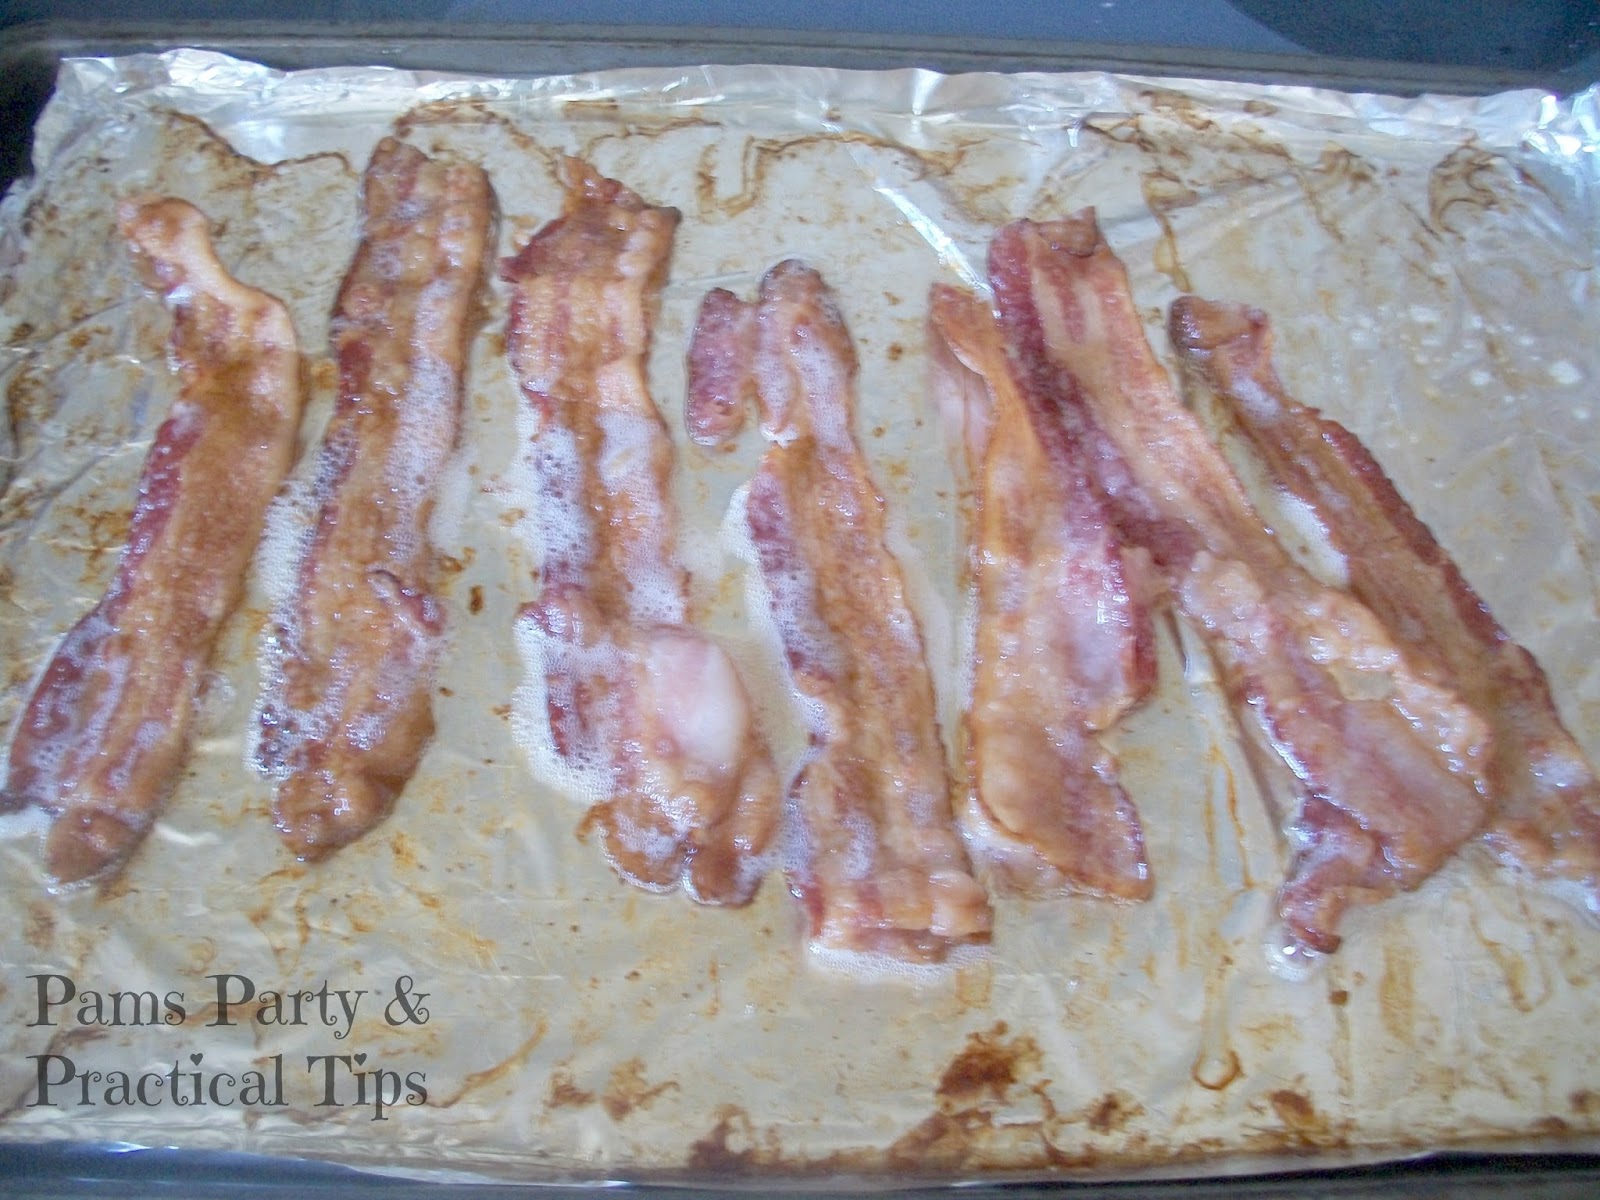 Making bacon in the oven cooks them perfectly without the mess